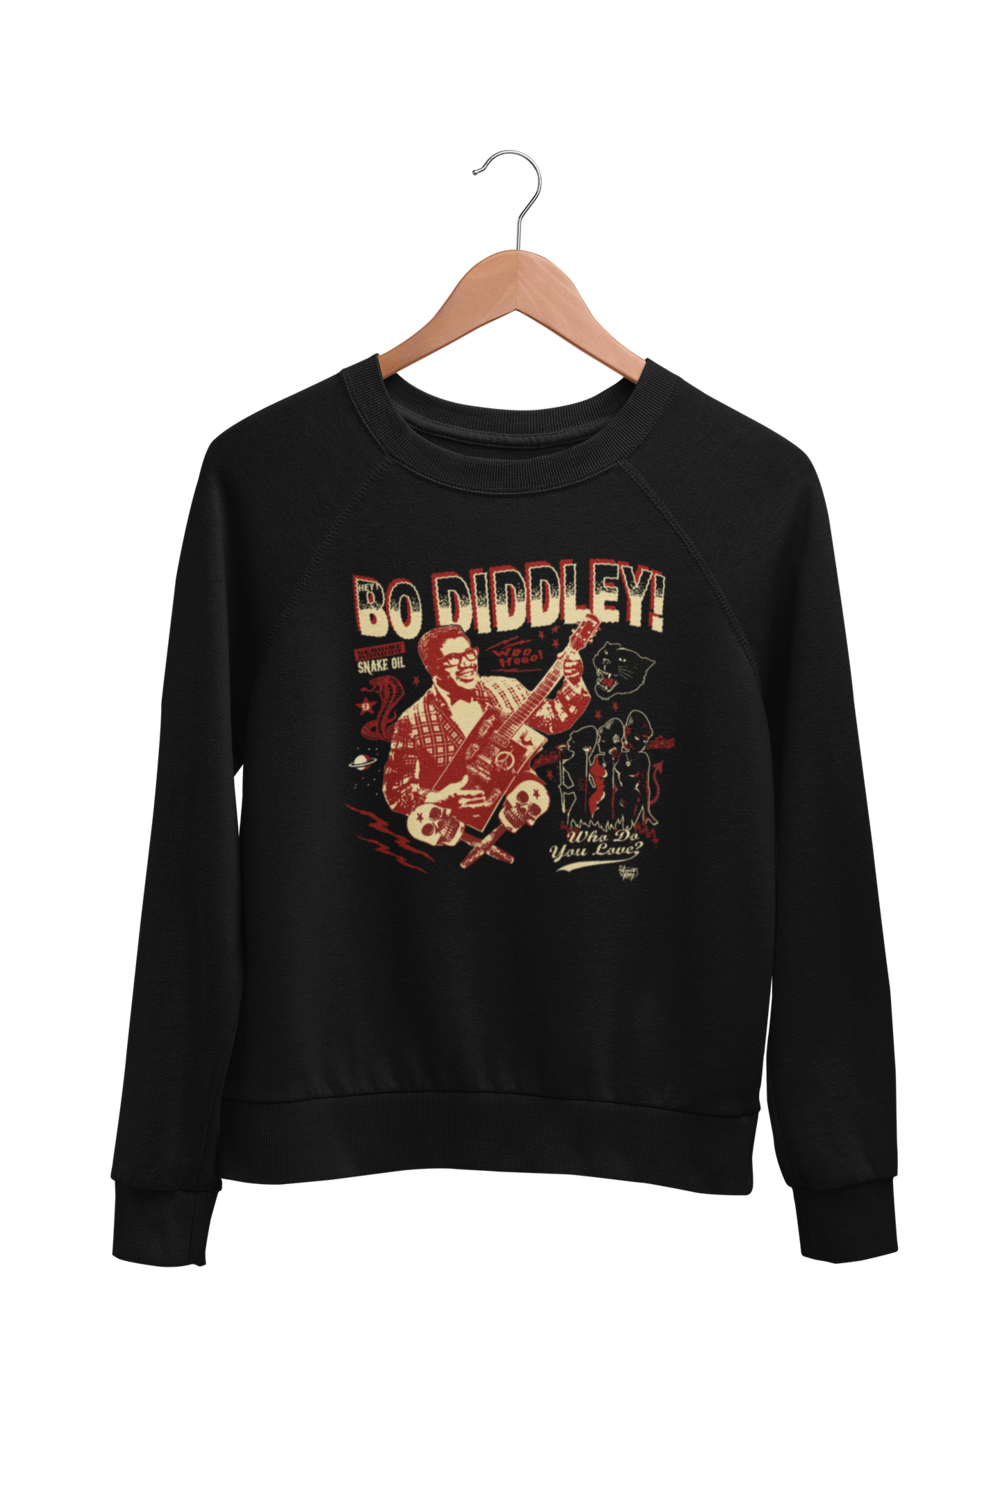 BO DIDDLEY SWEATSHIRT UNISEX by VINCE RAY